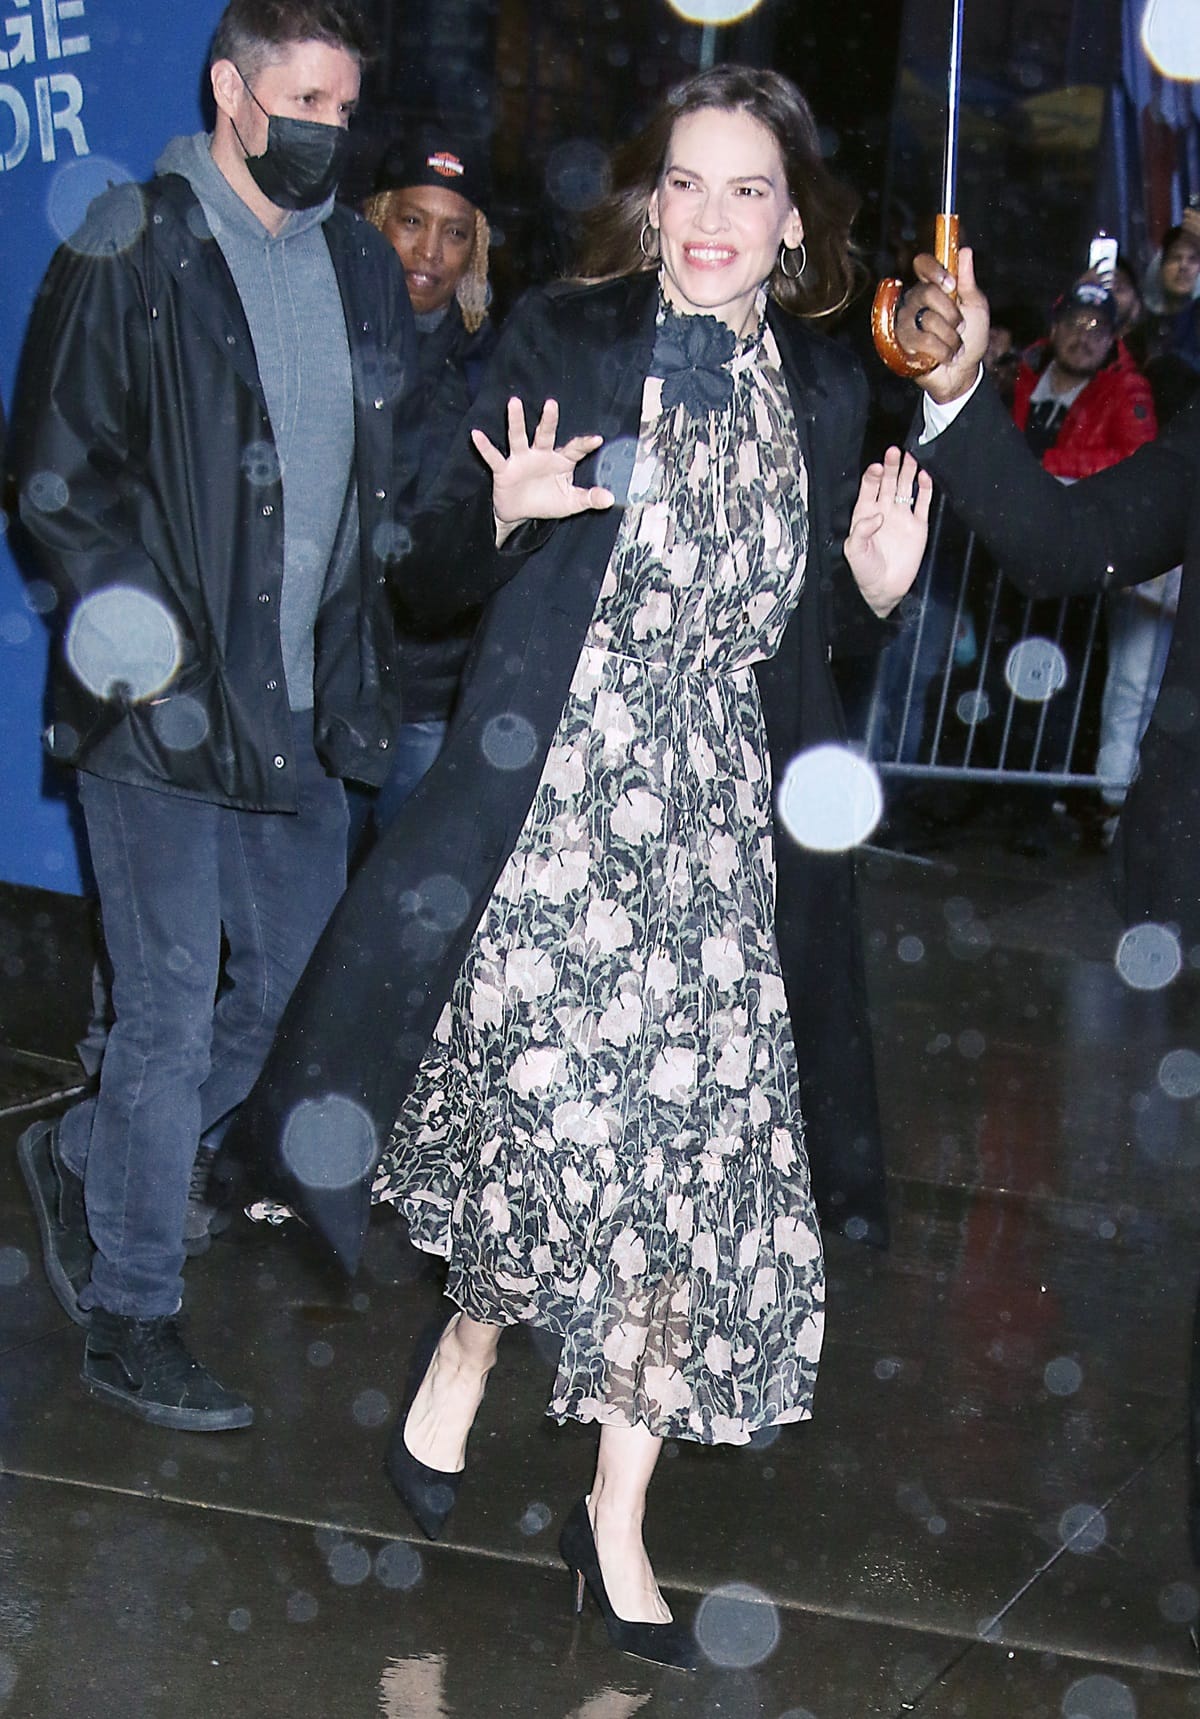 Wearing a Zimmermann kaleidoscope flutter midi dress, Hilary Swank arrives to announce she's expecting twins on "Good Morning America"